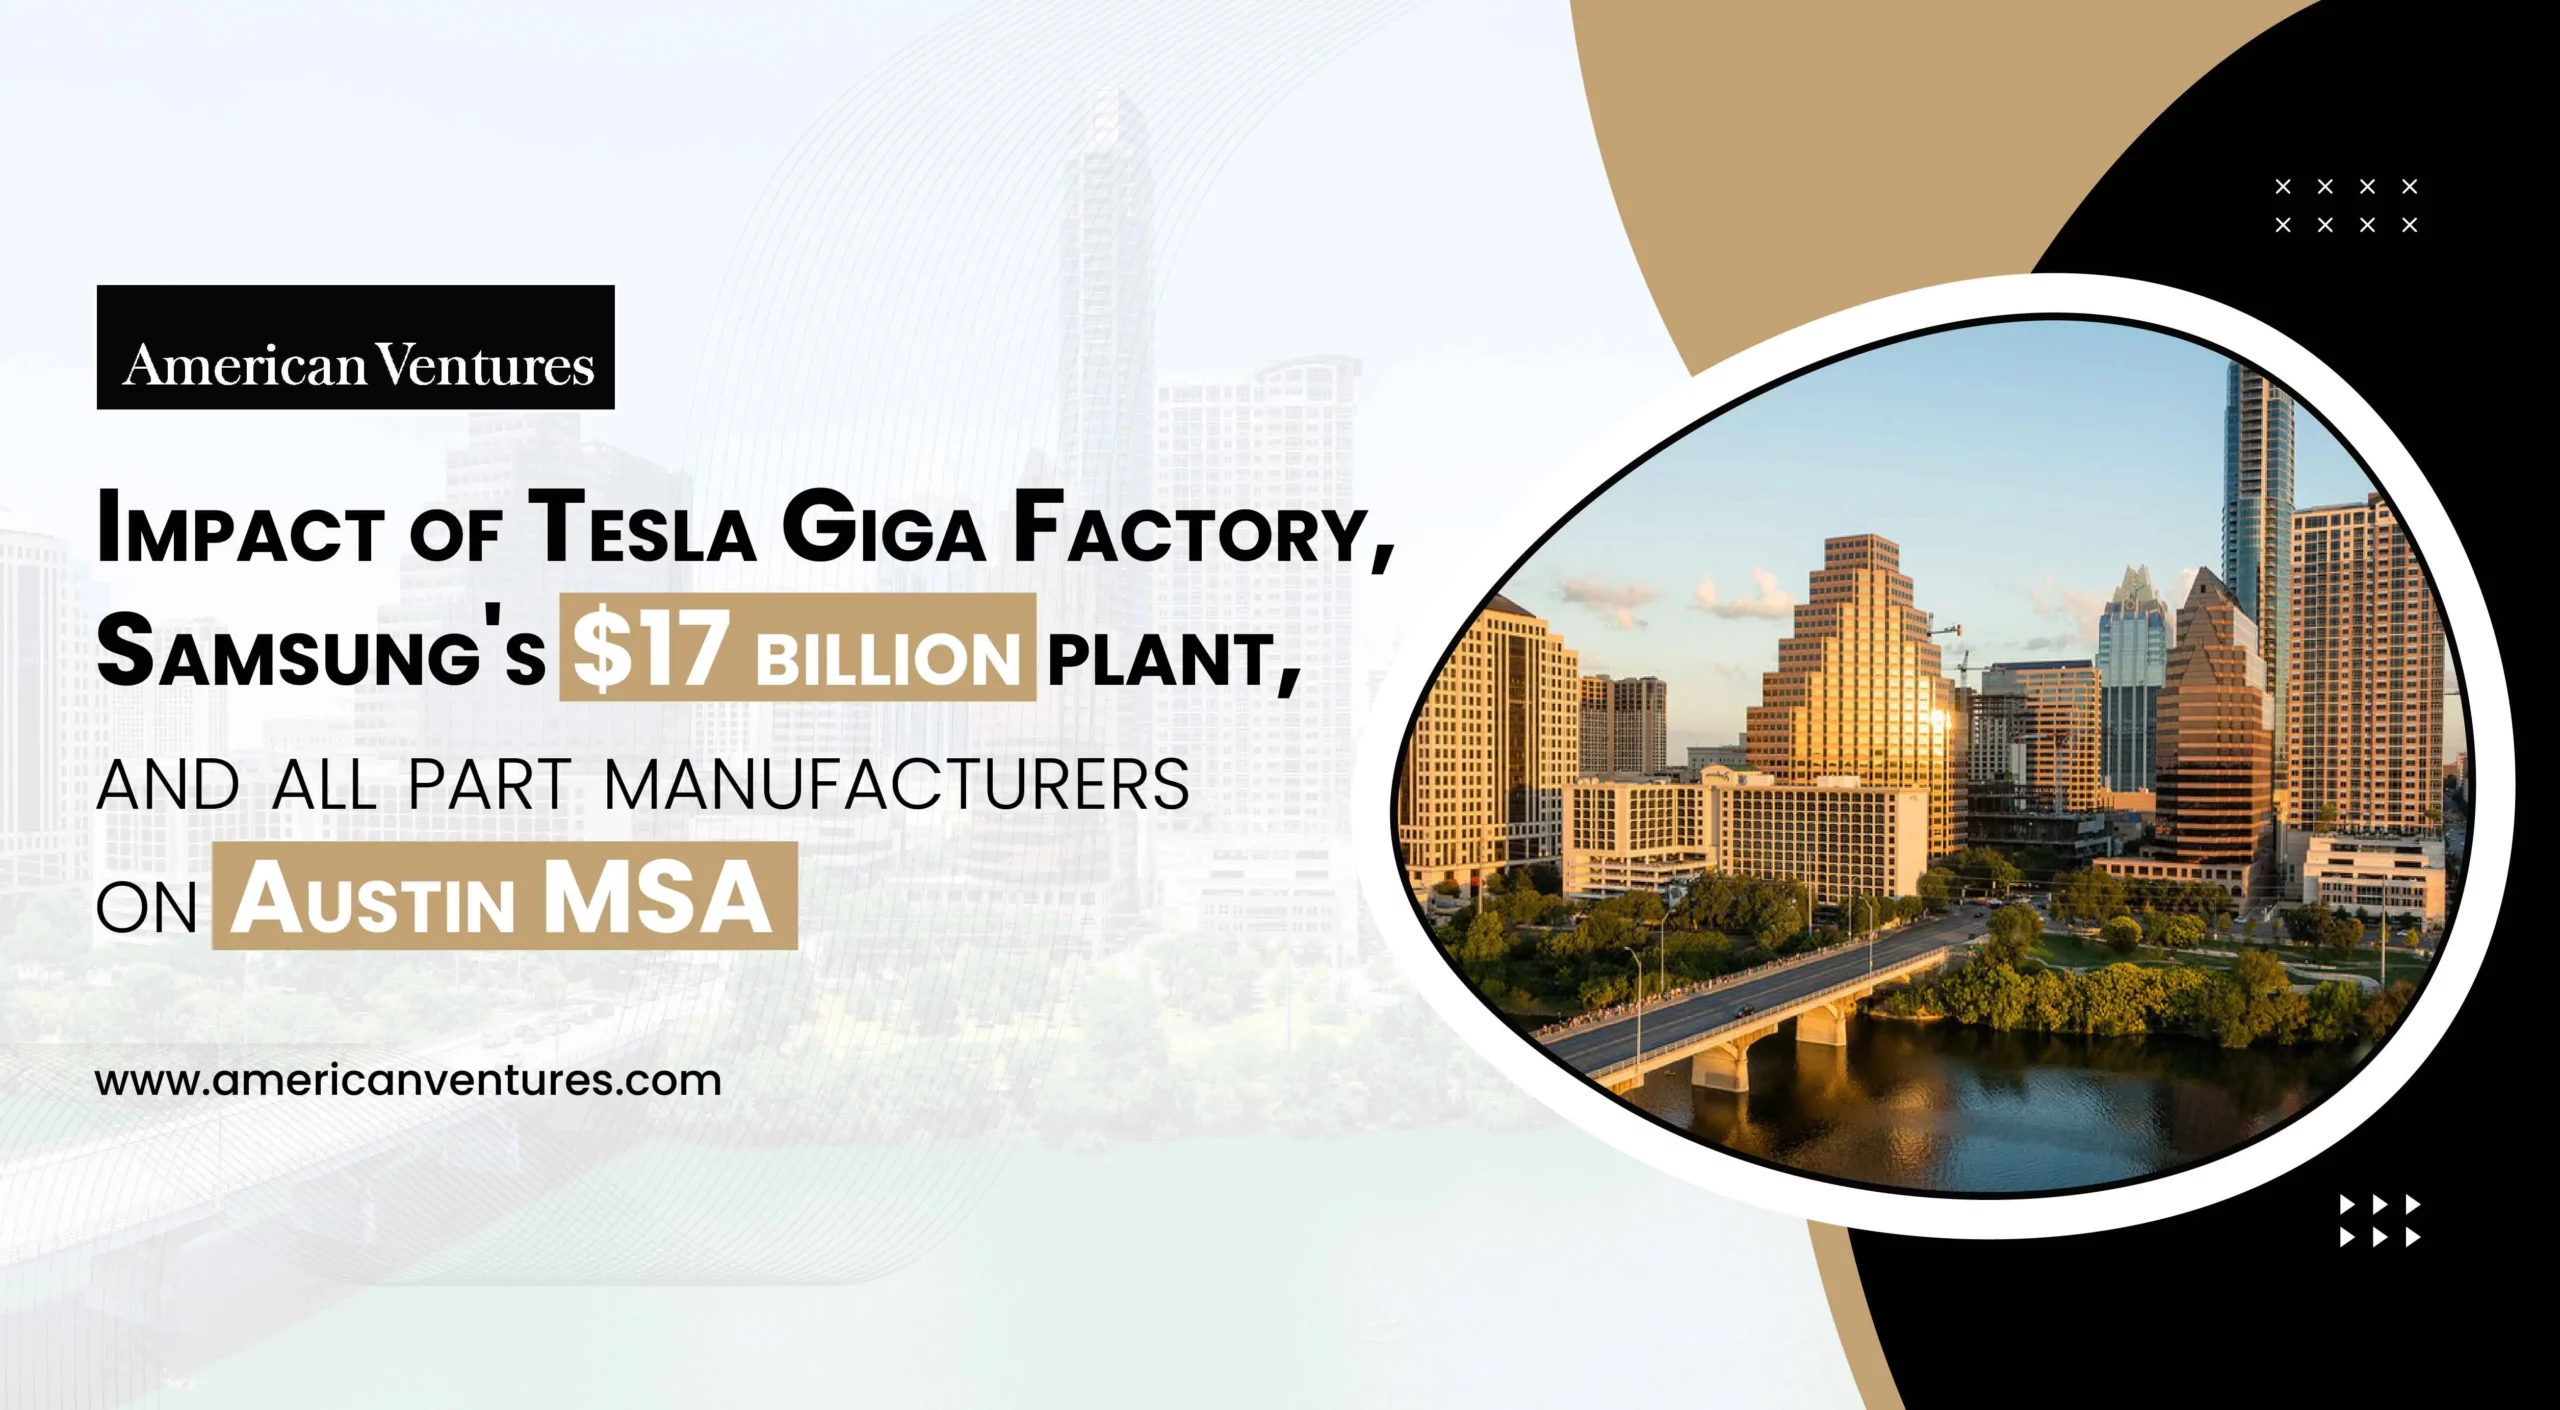 Impact of Tesla Giga Factory, Samsung’s’$17 billion plant, and all part manufacturers on Austin MSA